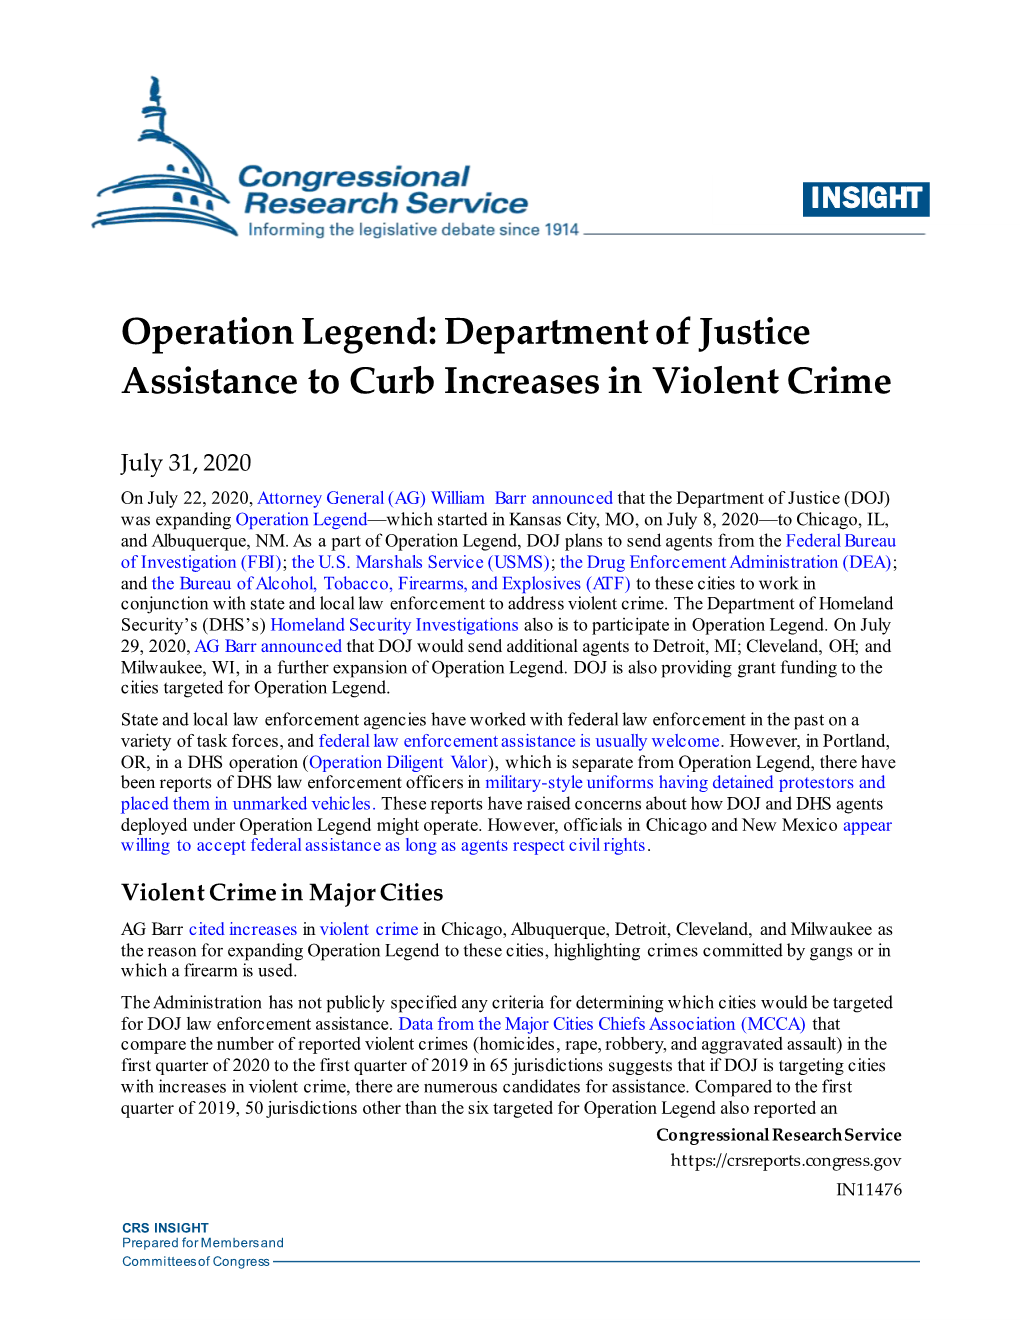 Operation Legend: Department of Justice Assistance to Curb Increases in Violent Crime